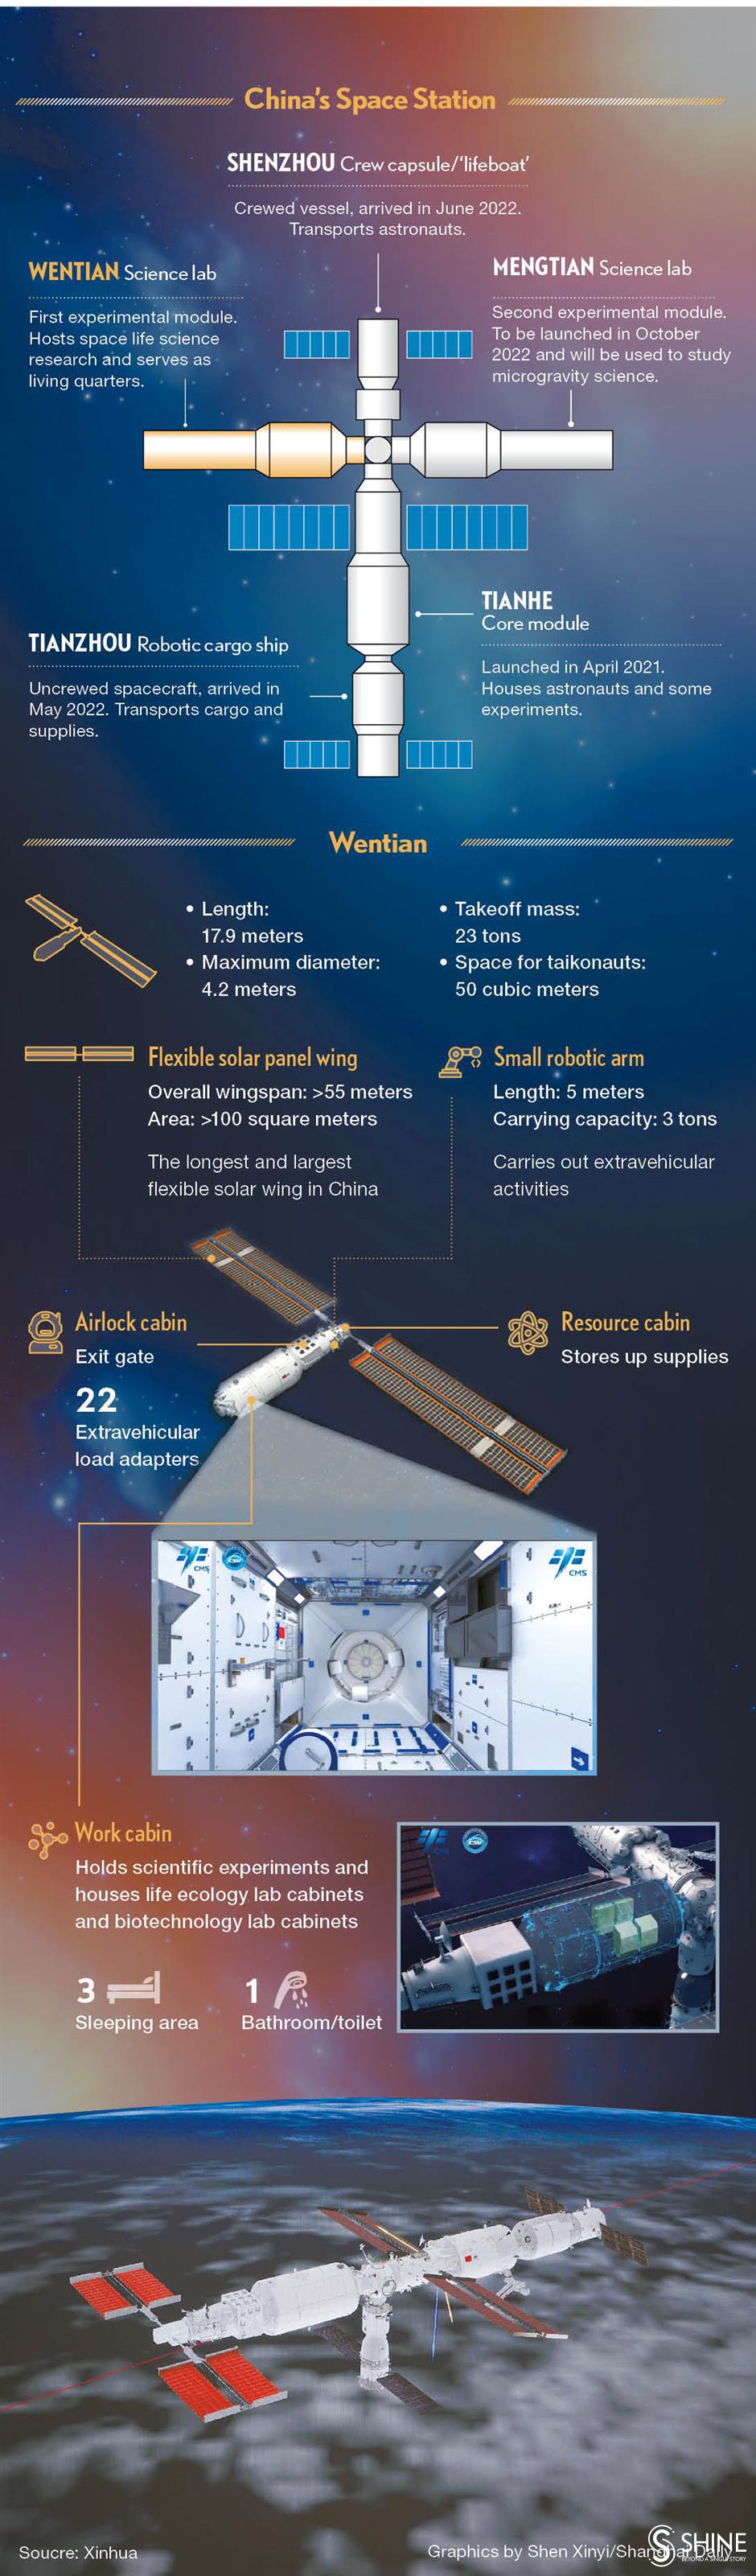 All about Wentian and China's space station